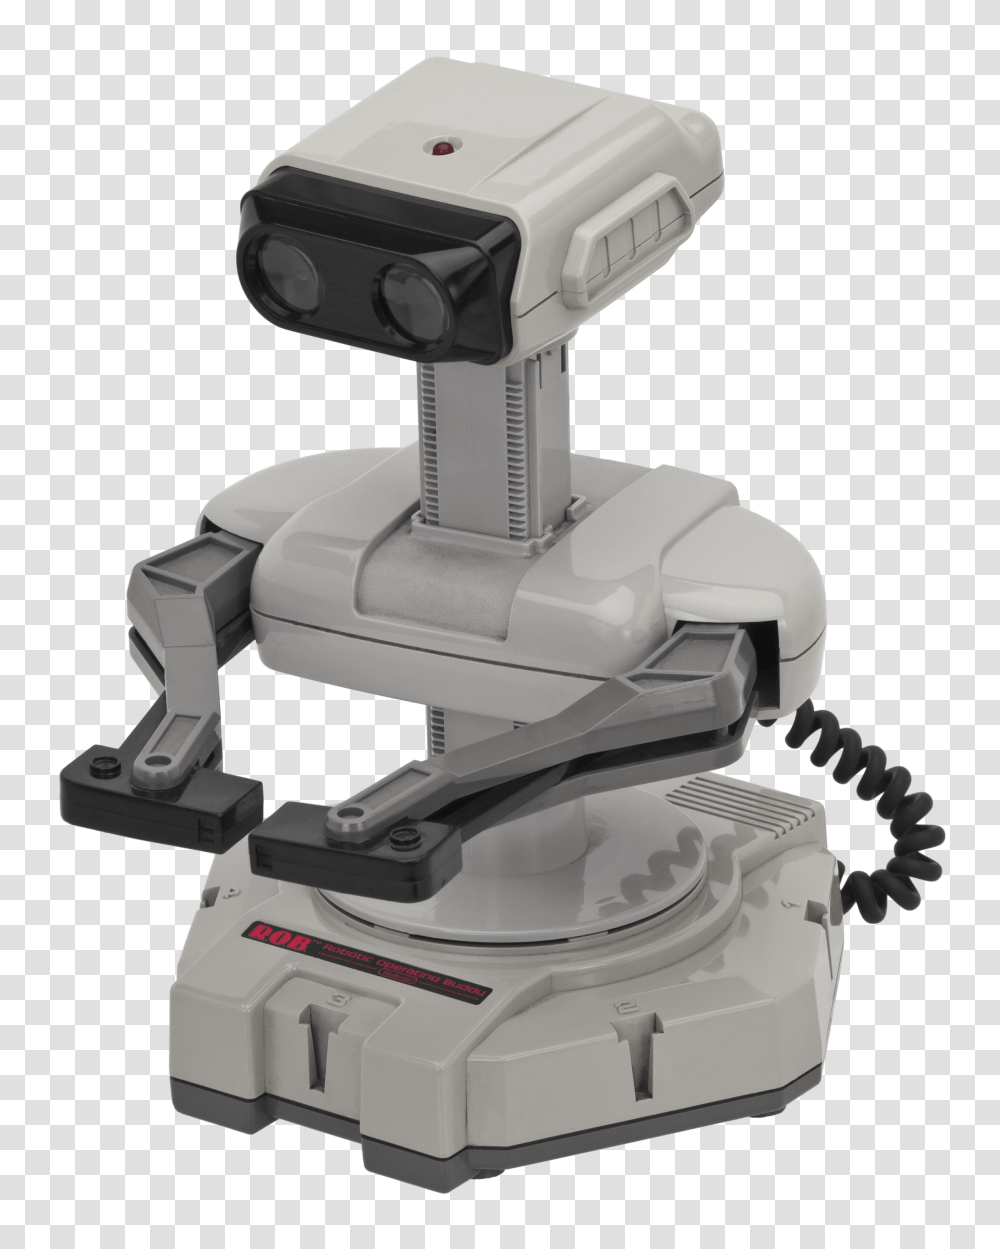 Fantasy, Microscope, Robot, Projector Transparent Png